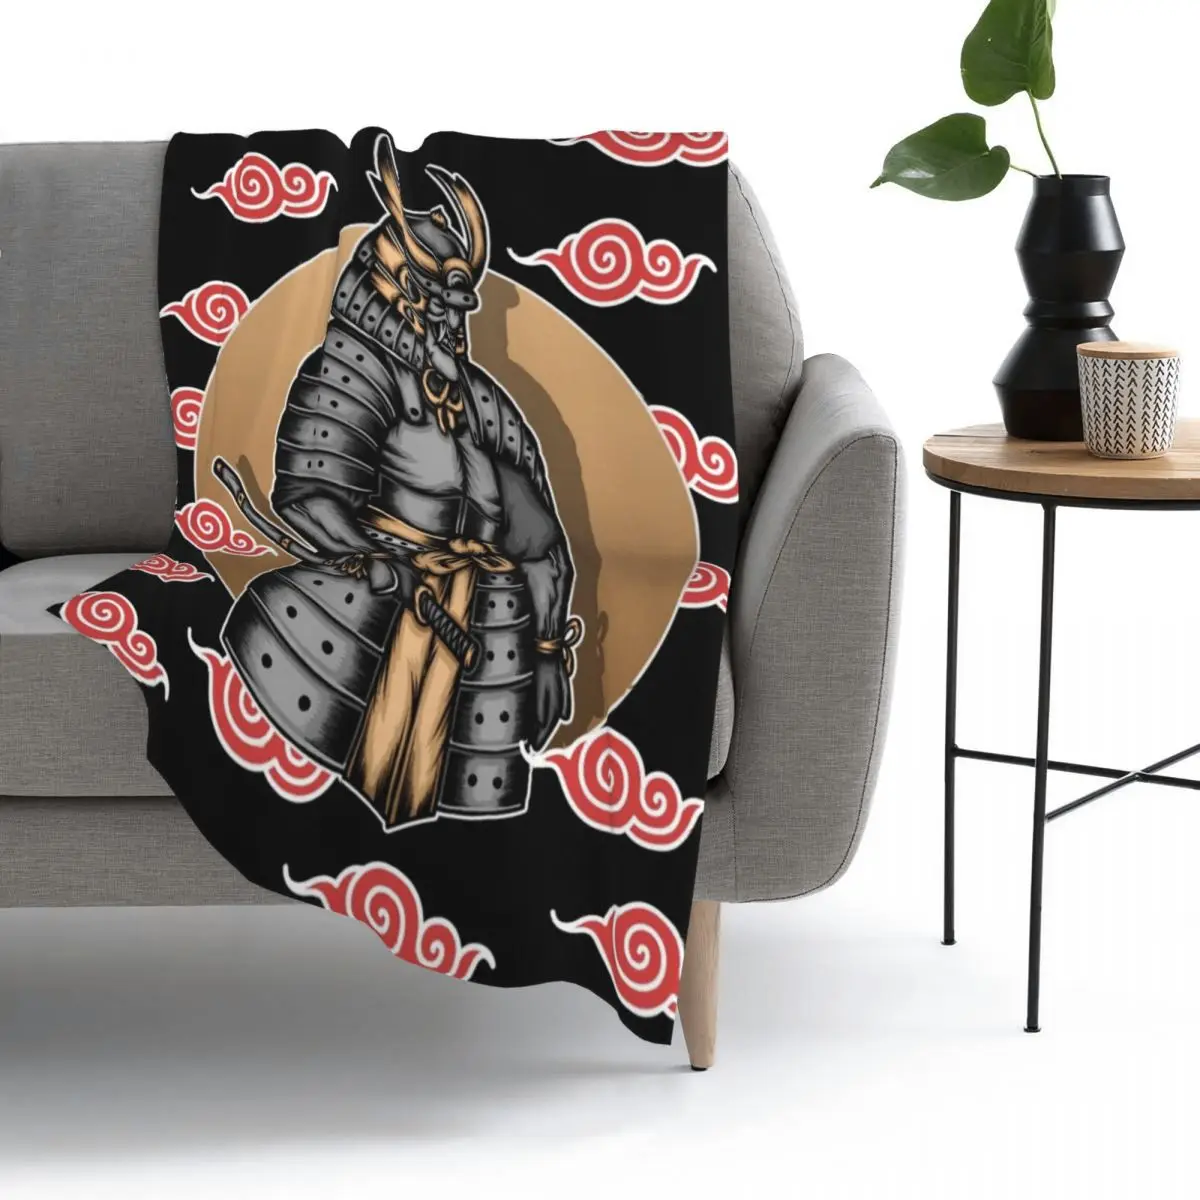 

Red Cloud Japanese Samurai Warrior Anime Throw Blanket Bedspread Bed Blanket Sofa Blanket flannel Cozy bedclothes Home travel